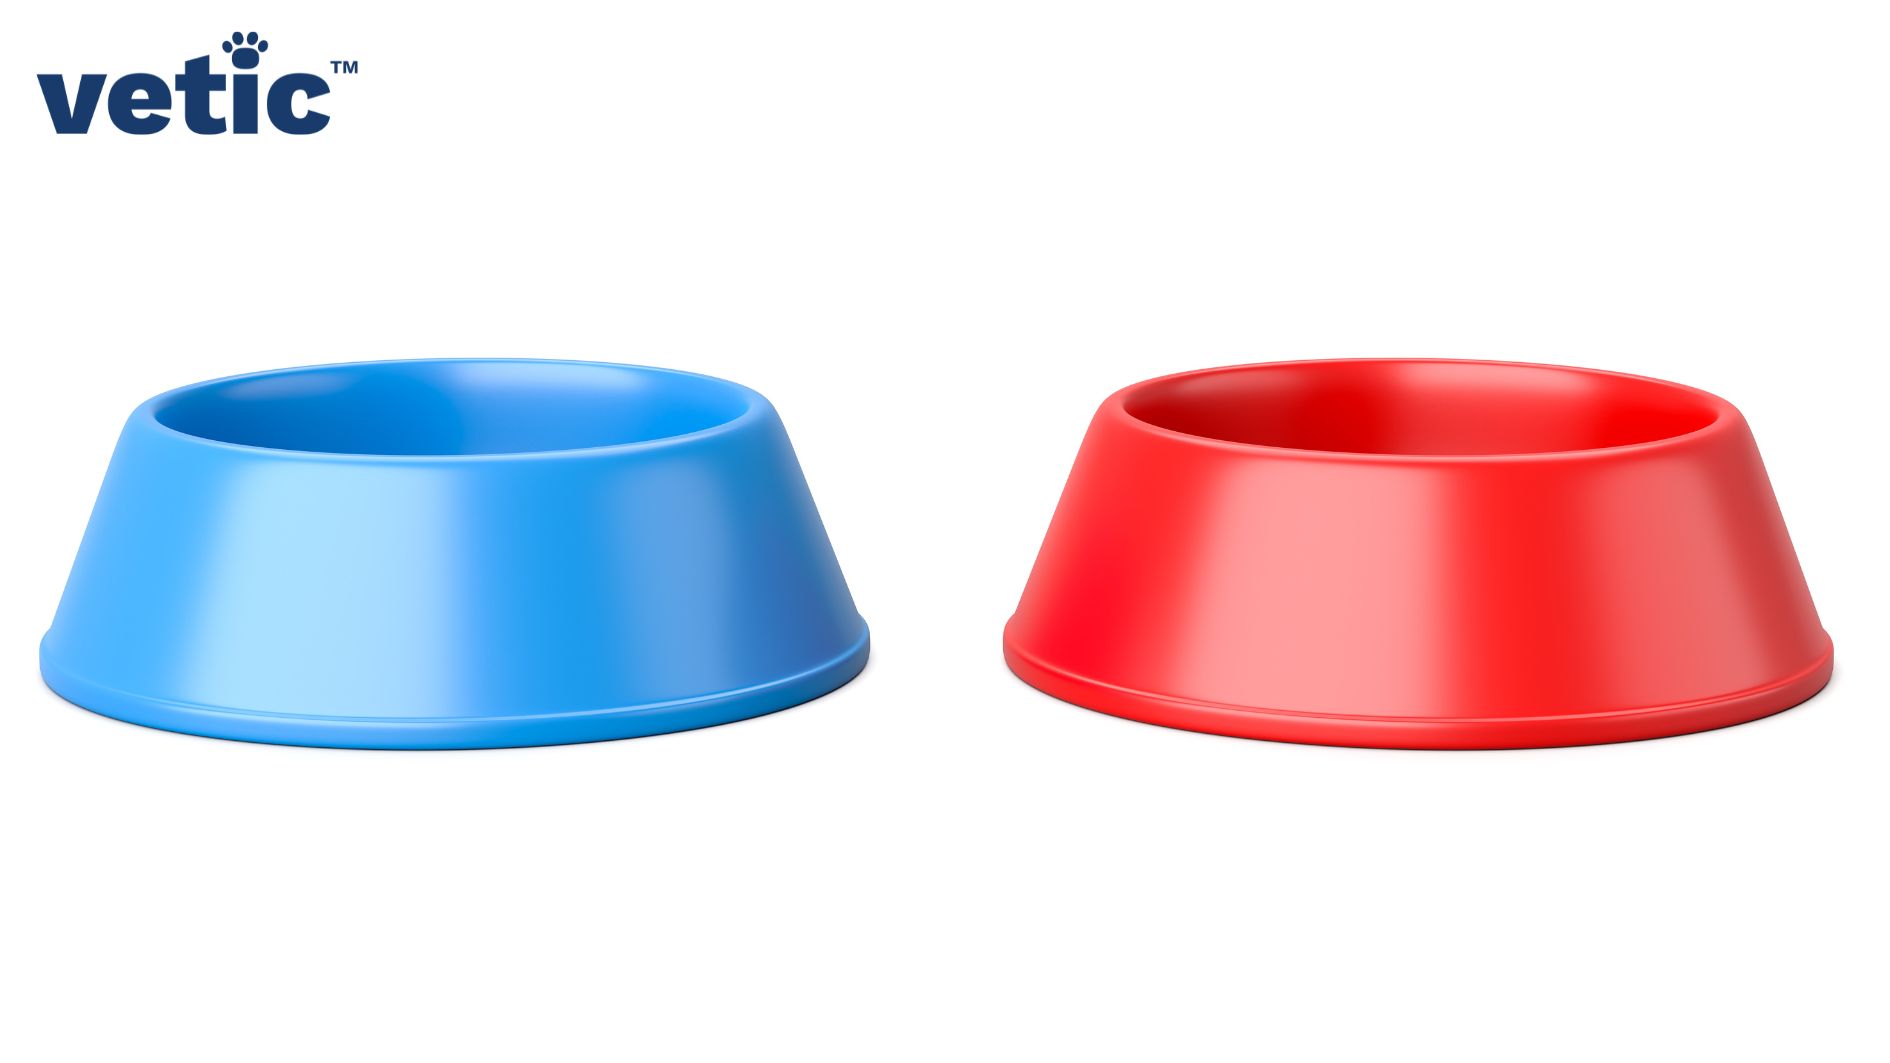 Two plastic bowls kept side by side, like made of melamine - one red and one blue. Both are broader at the bottom with anti-skid properties.